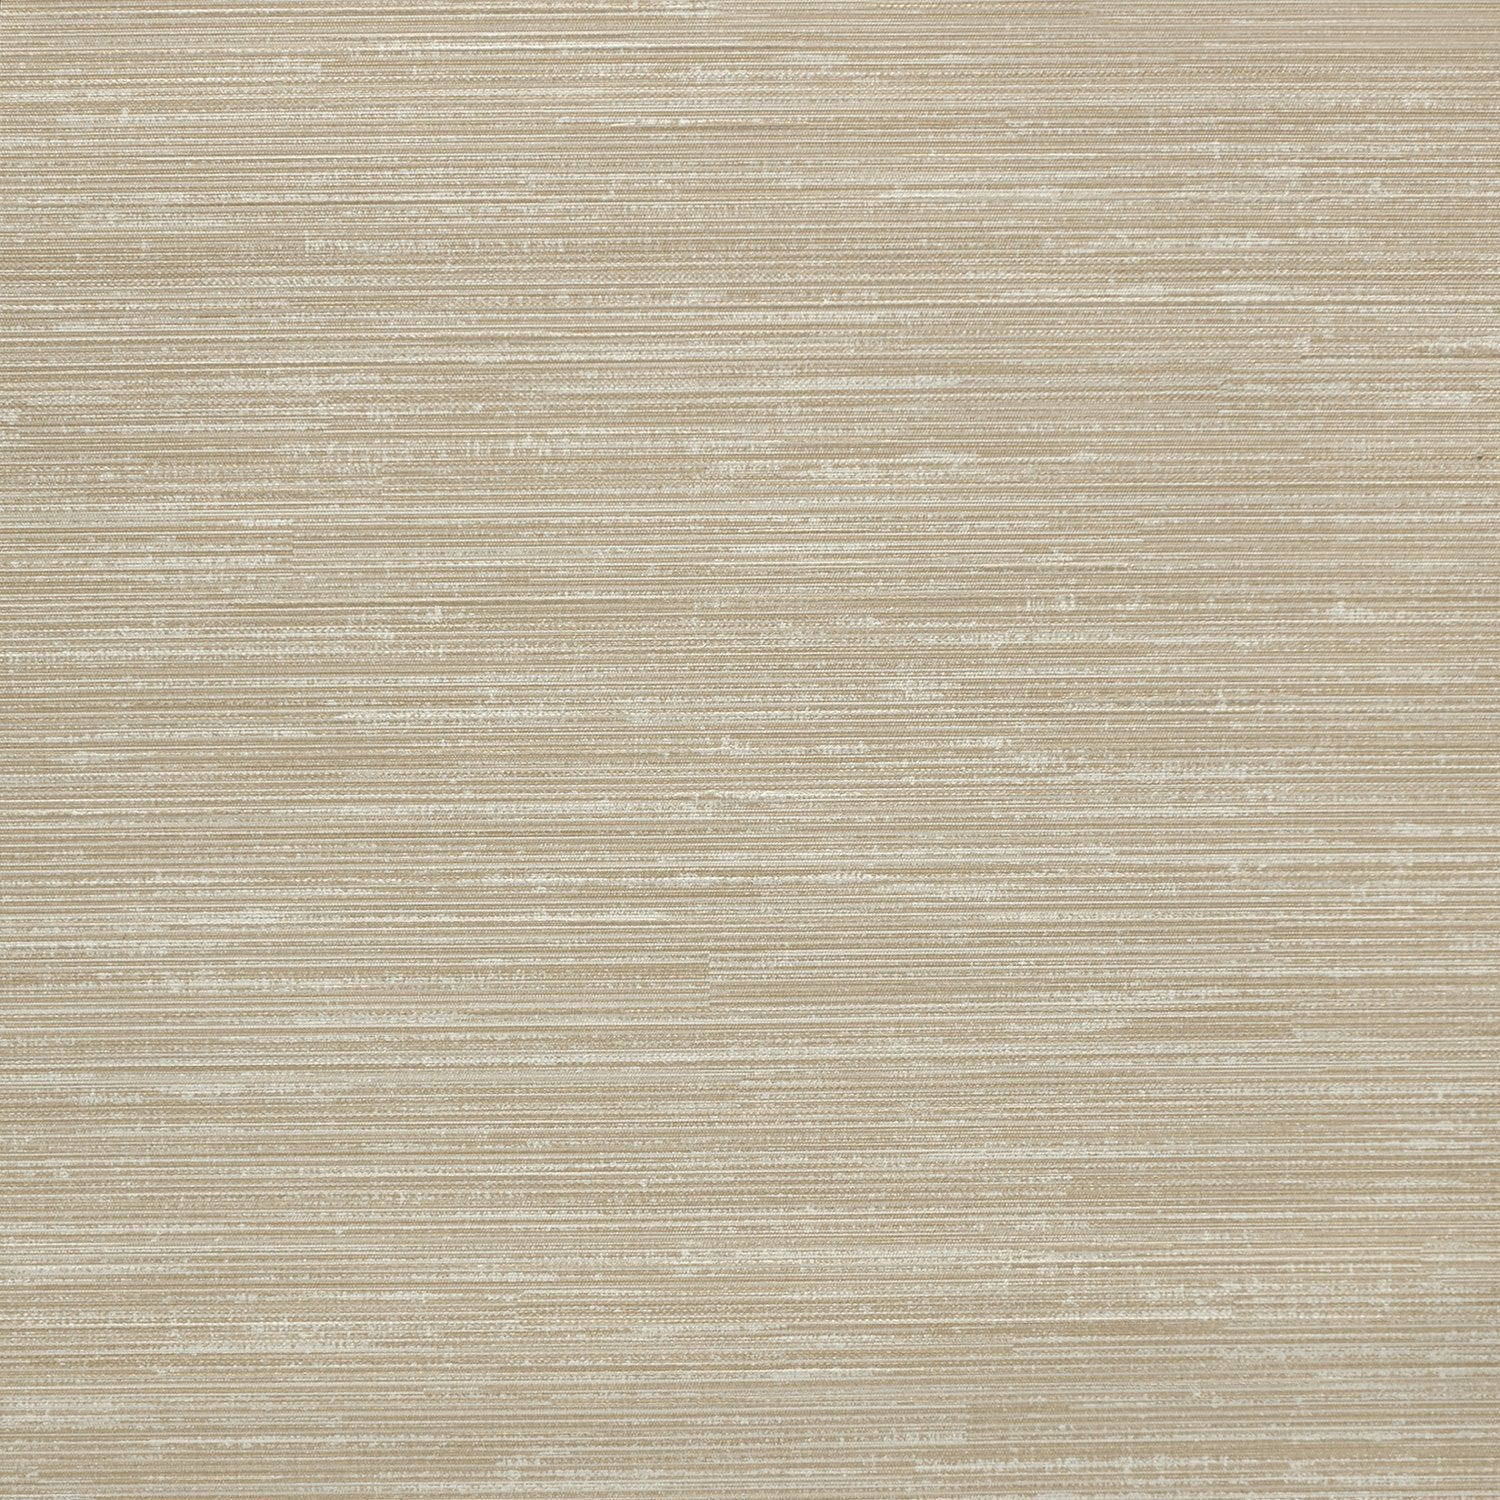 Casbah Silk - Y47328 - Wallcovering - Vycon - Kube Contract